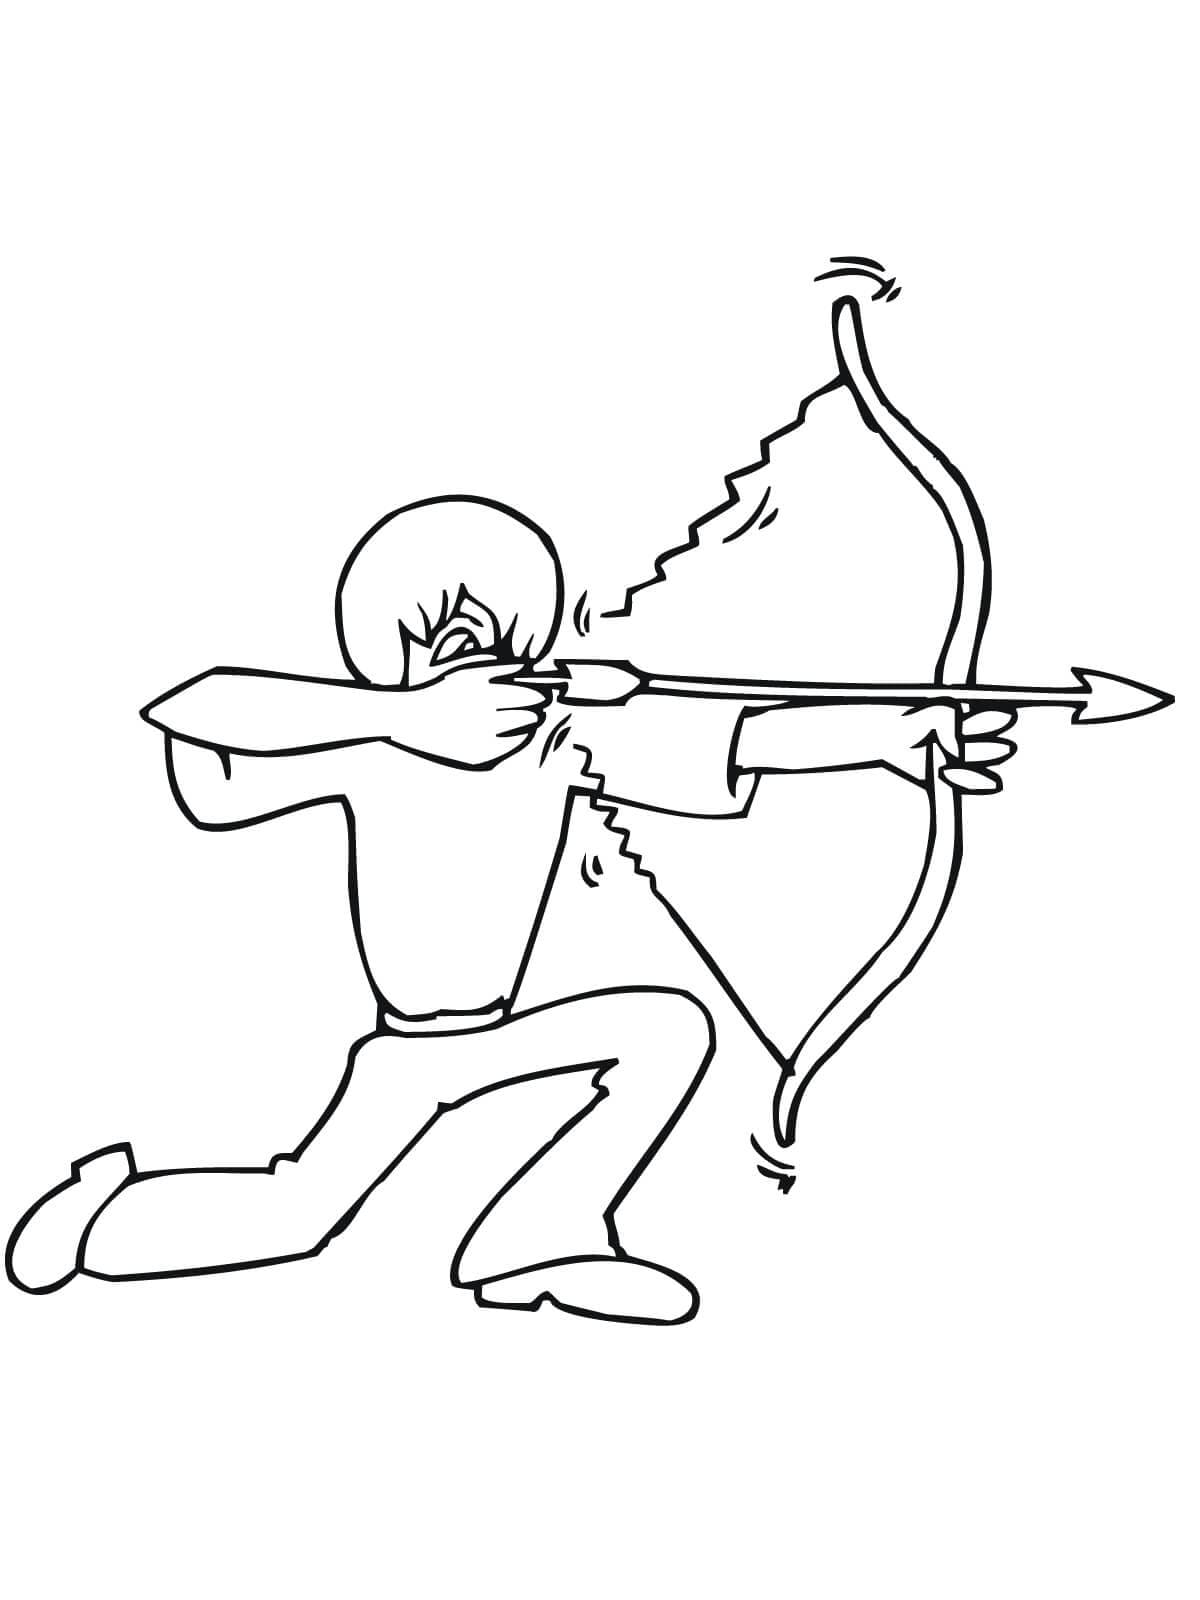 The Boy Holding A Bow